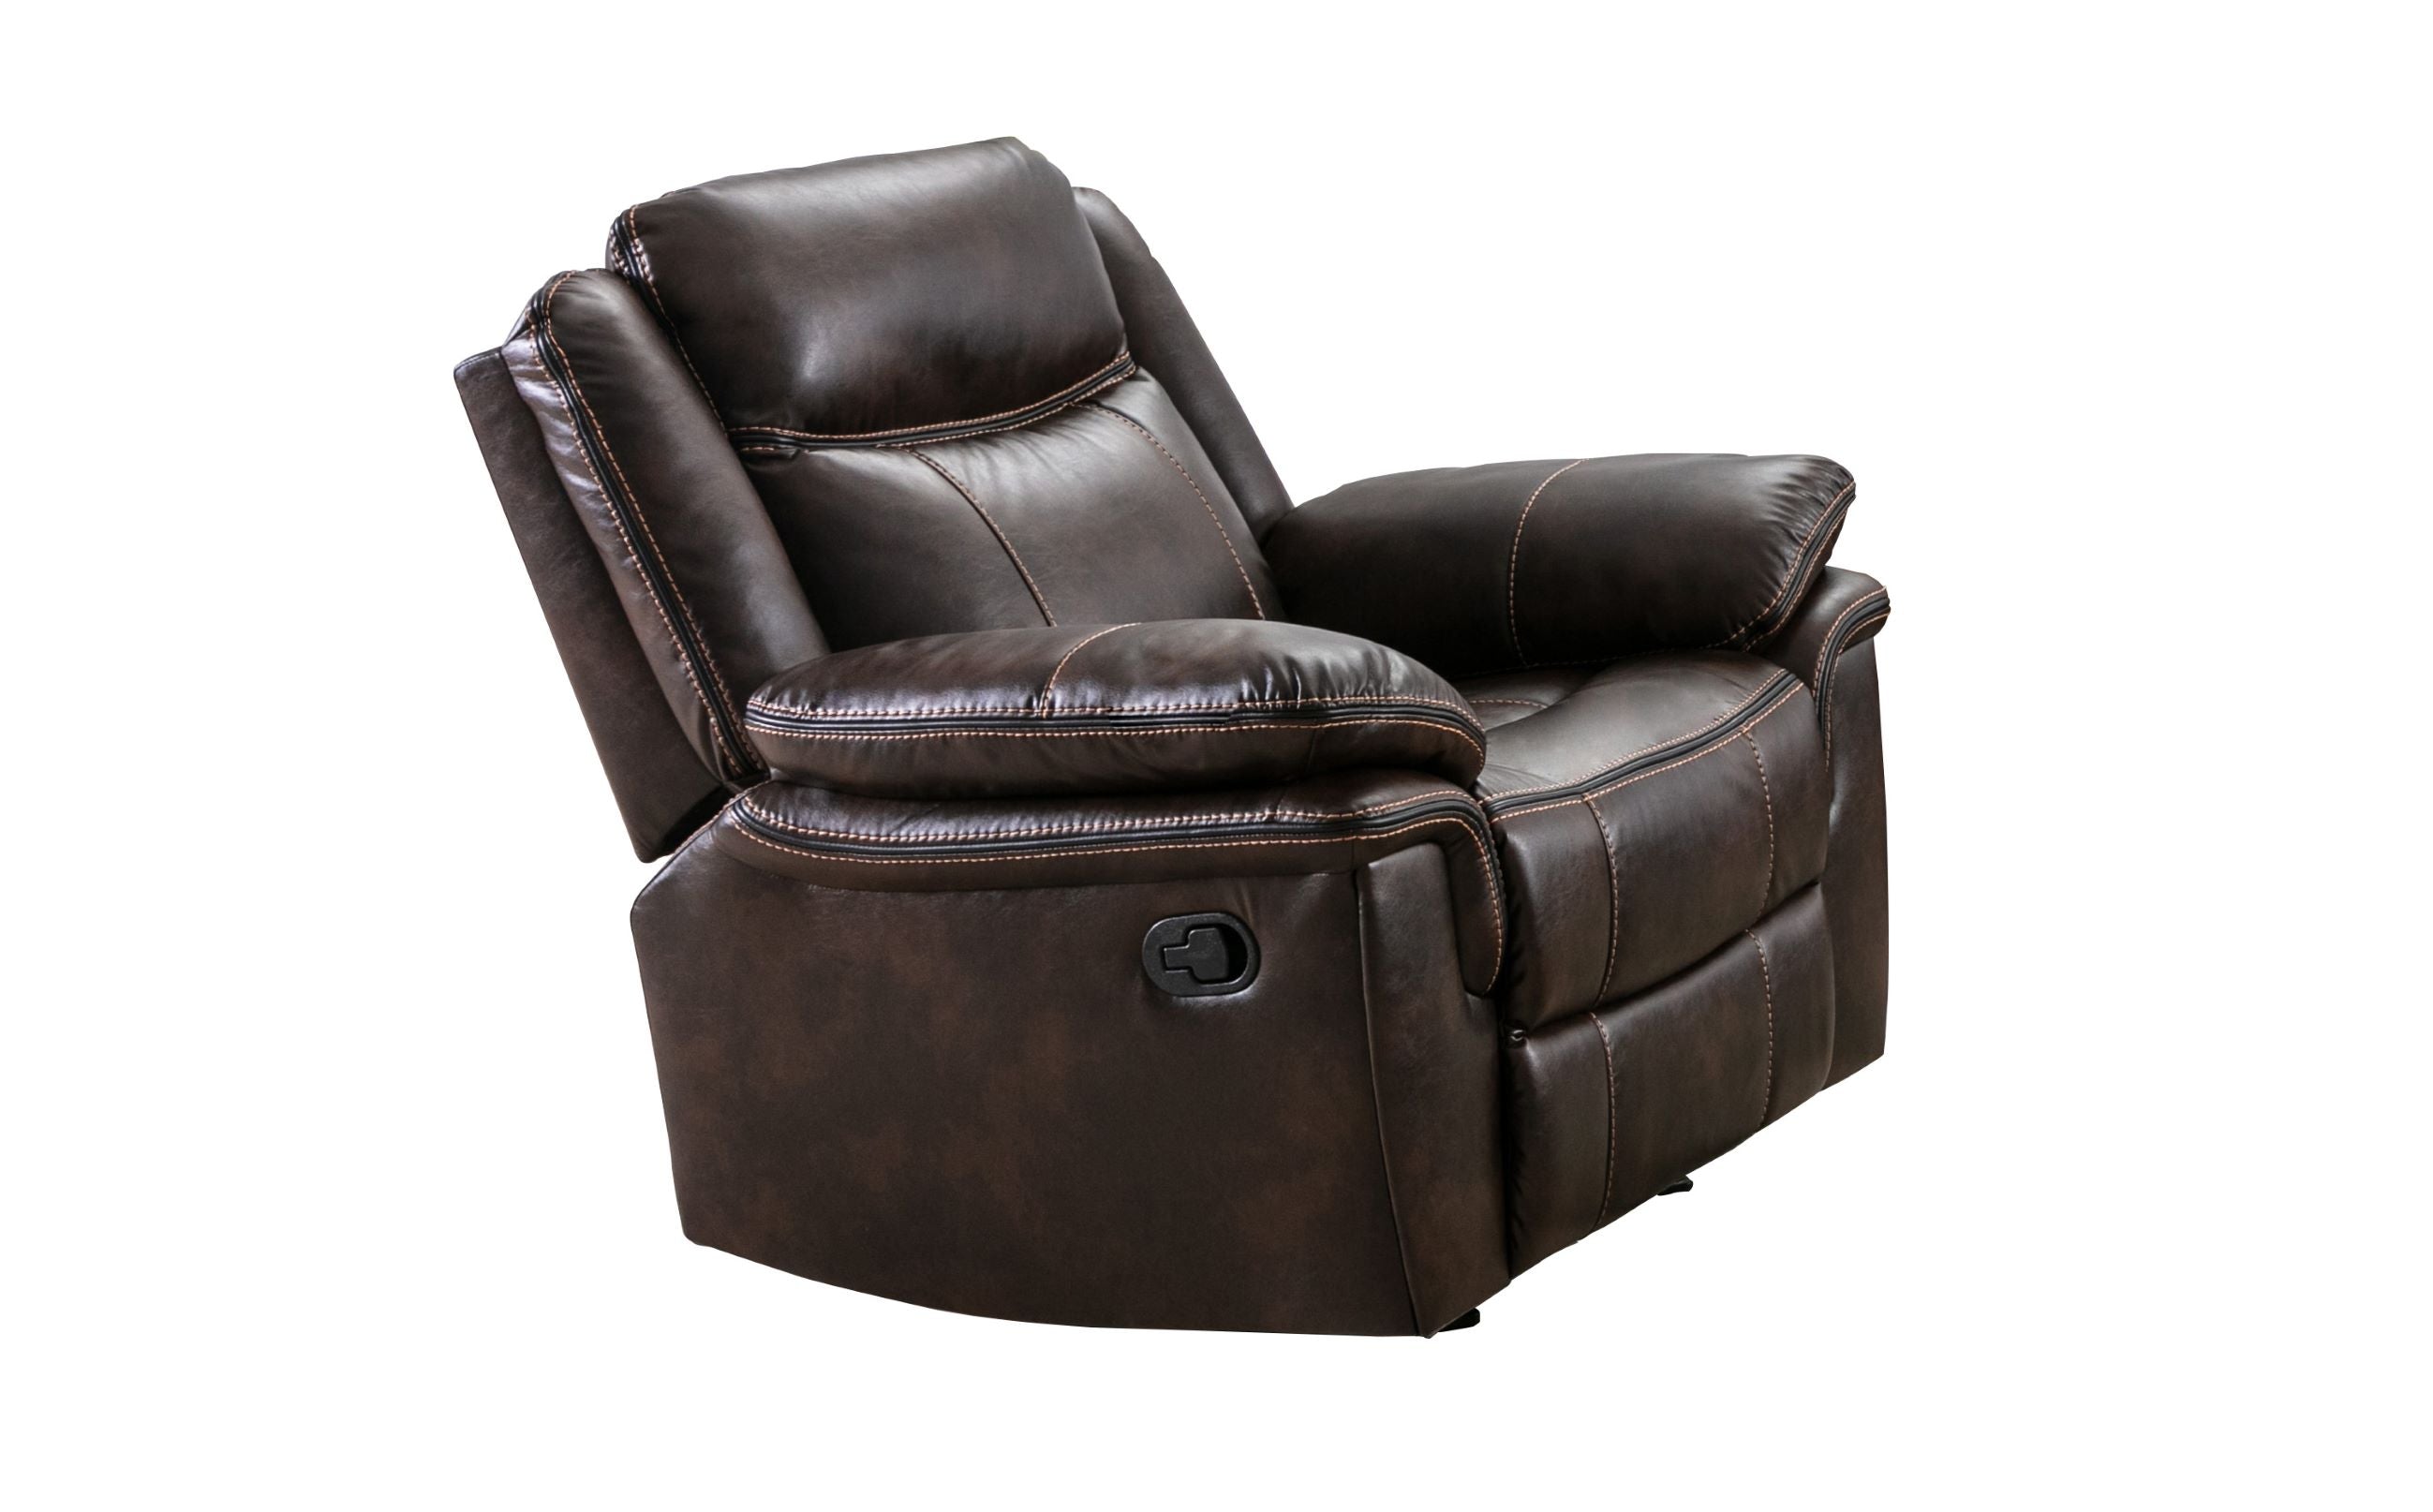 Peabody Recliner Sofa Collection Brown 99933